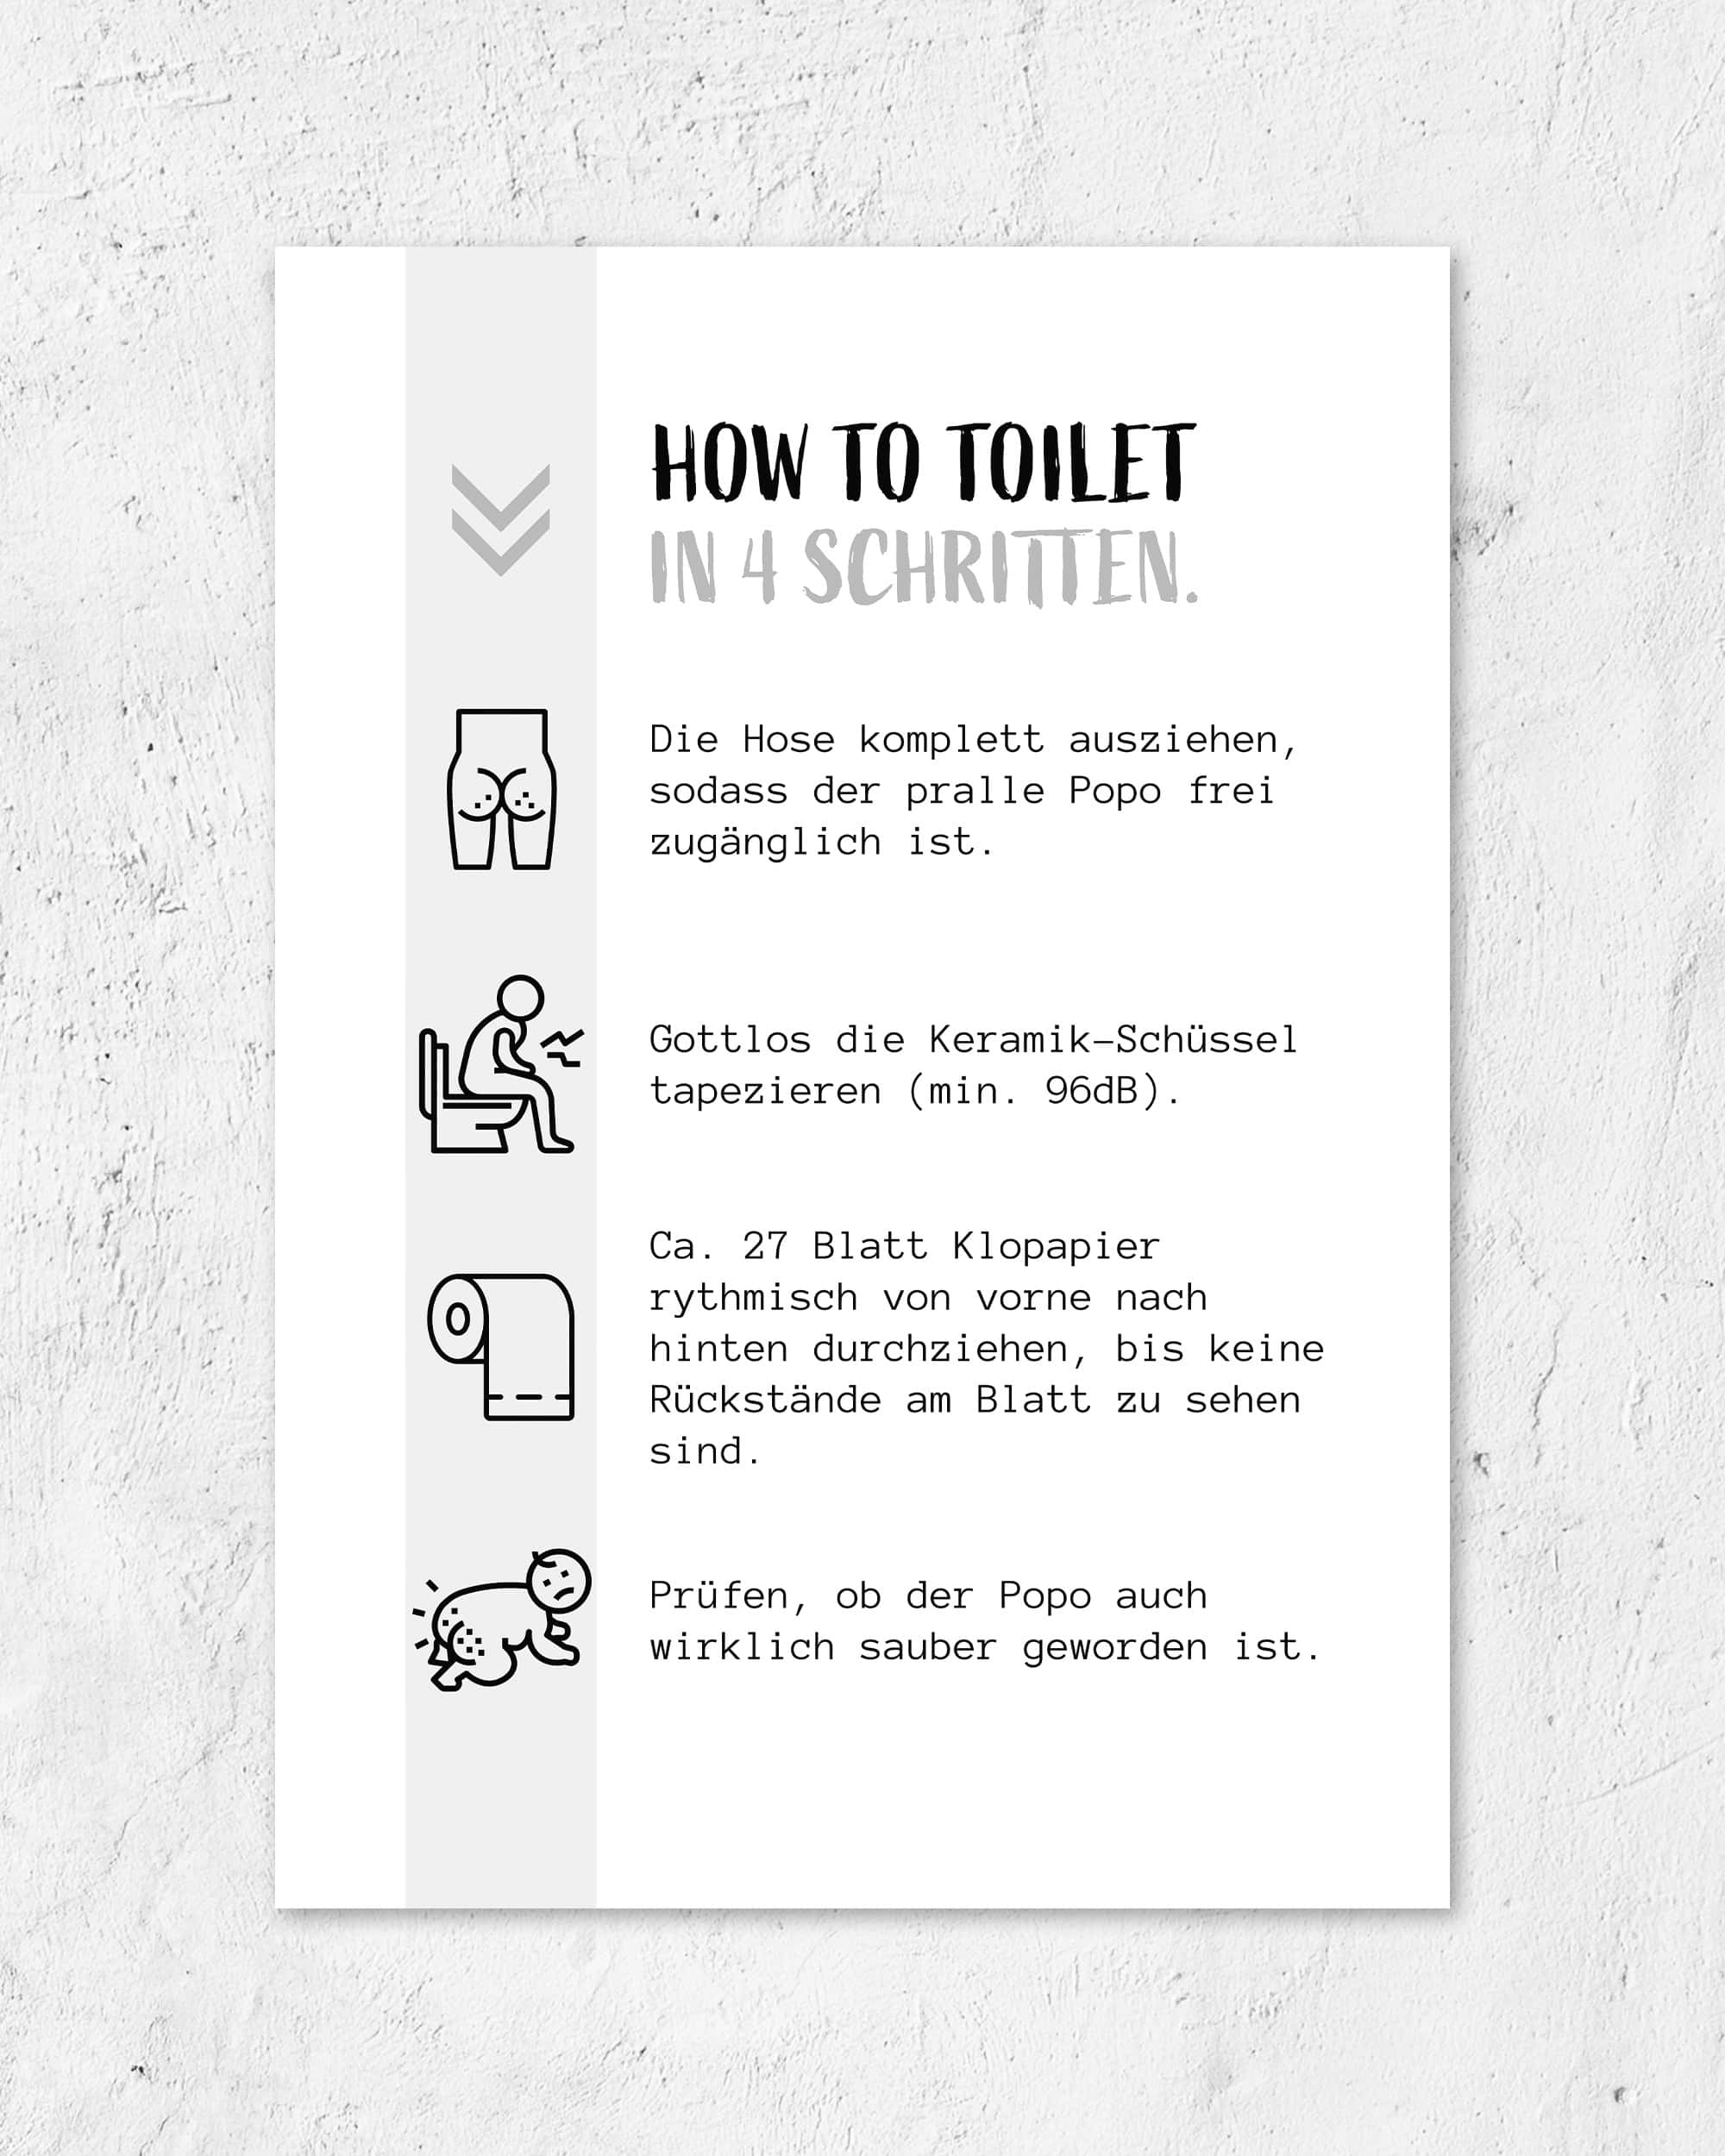 How to Toilet | 3-Type Poster